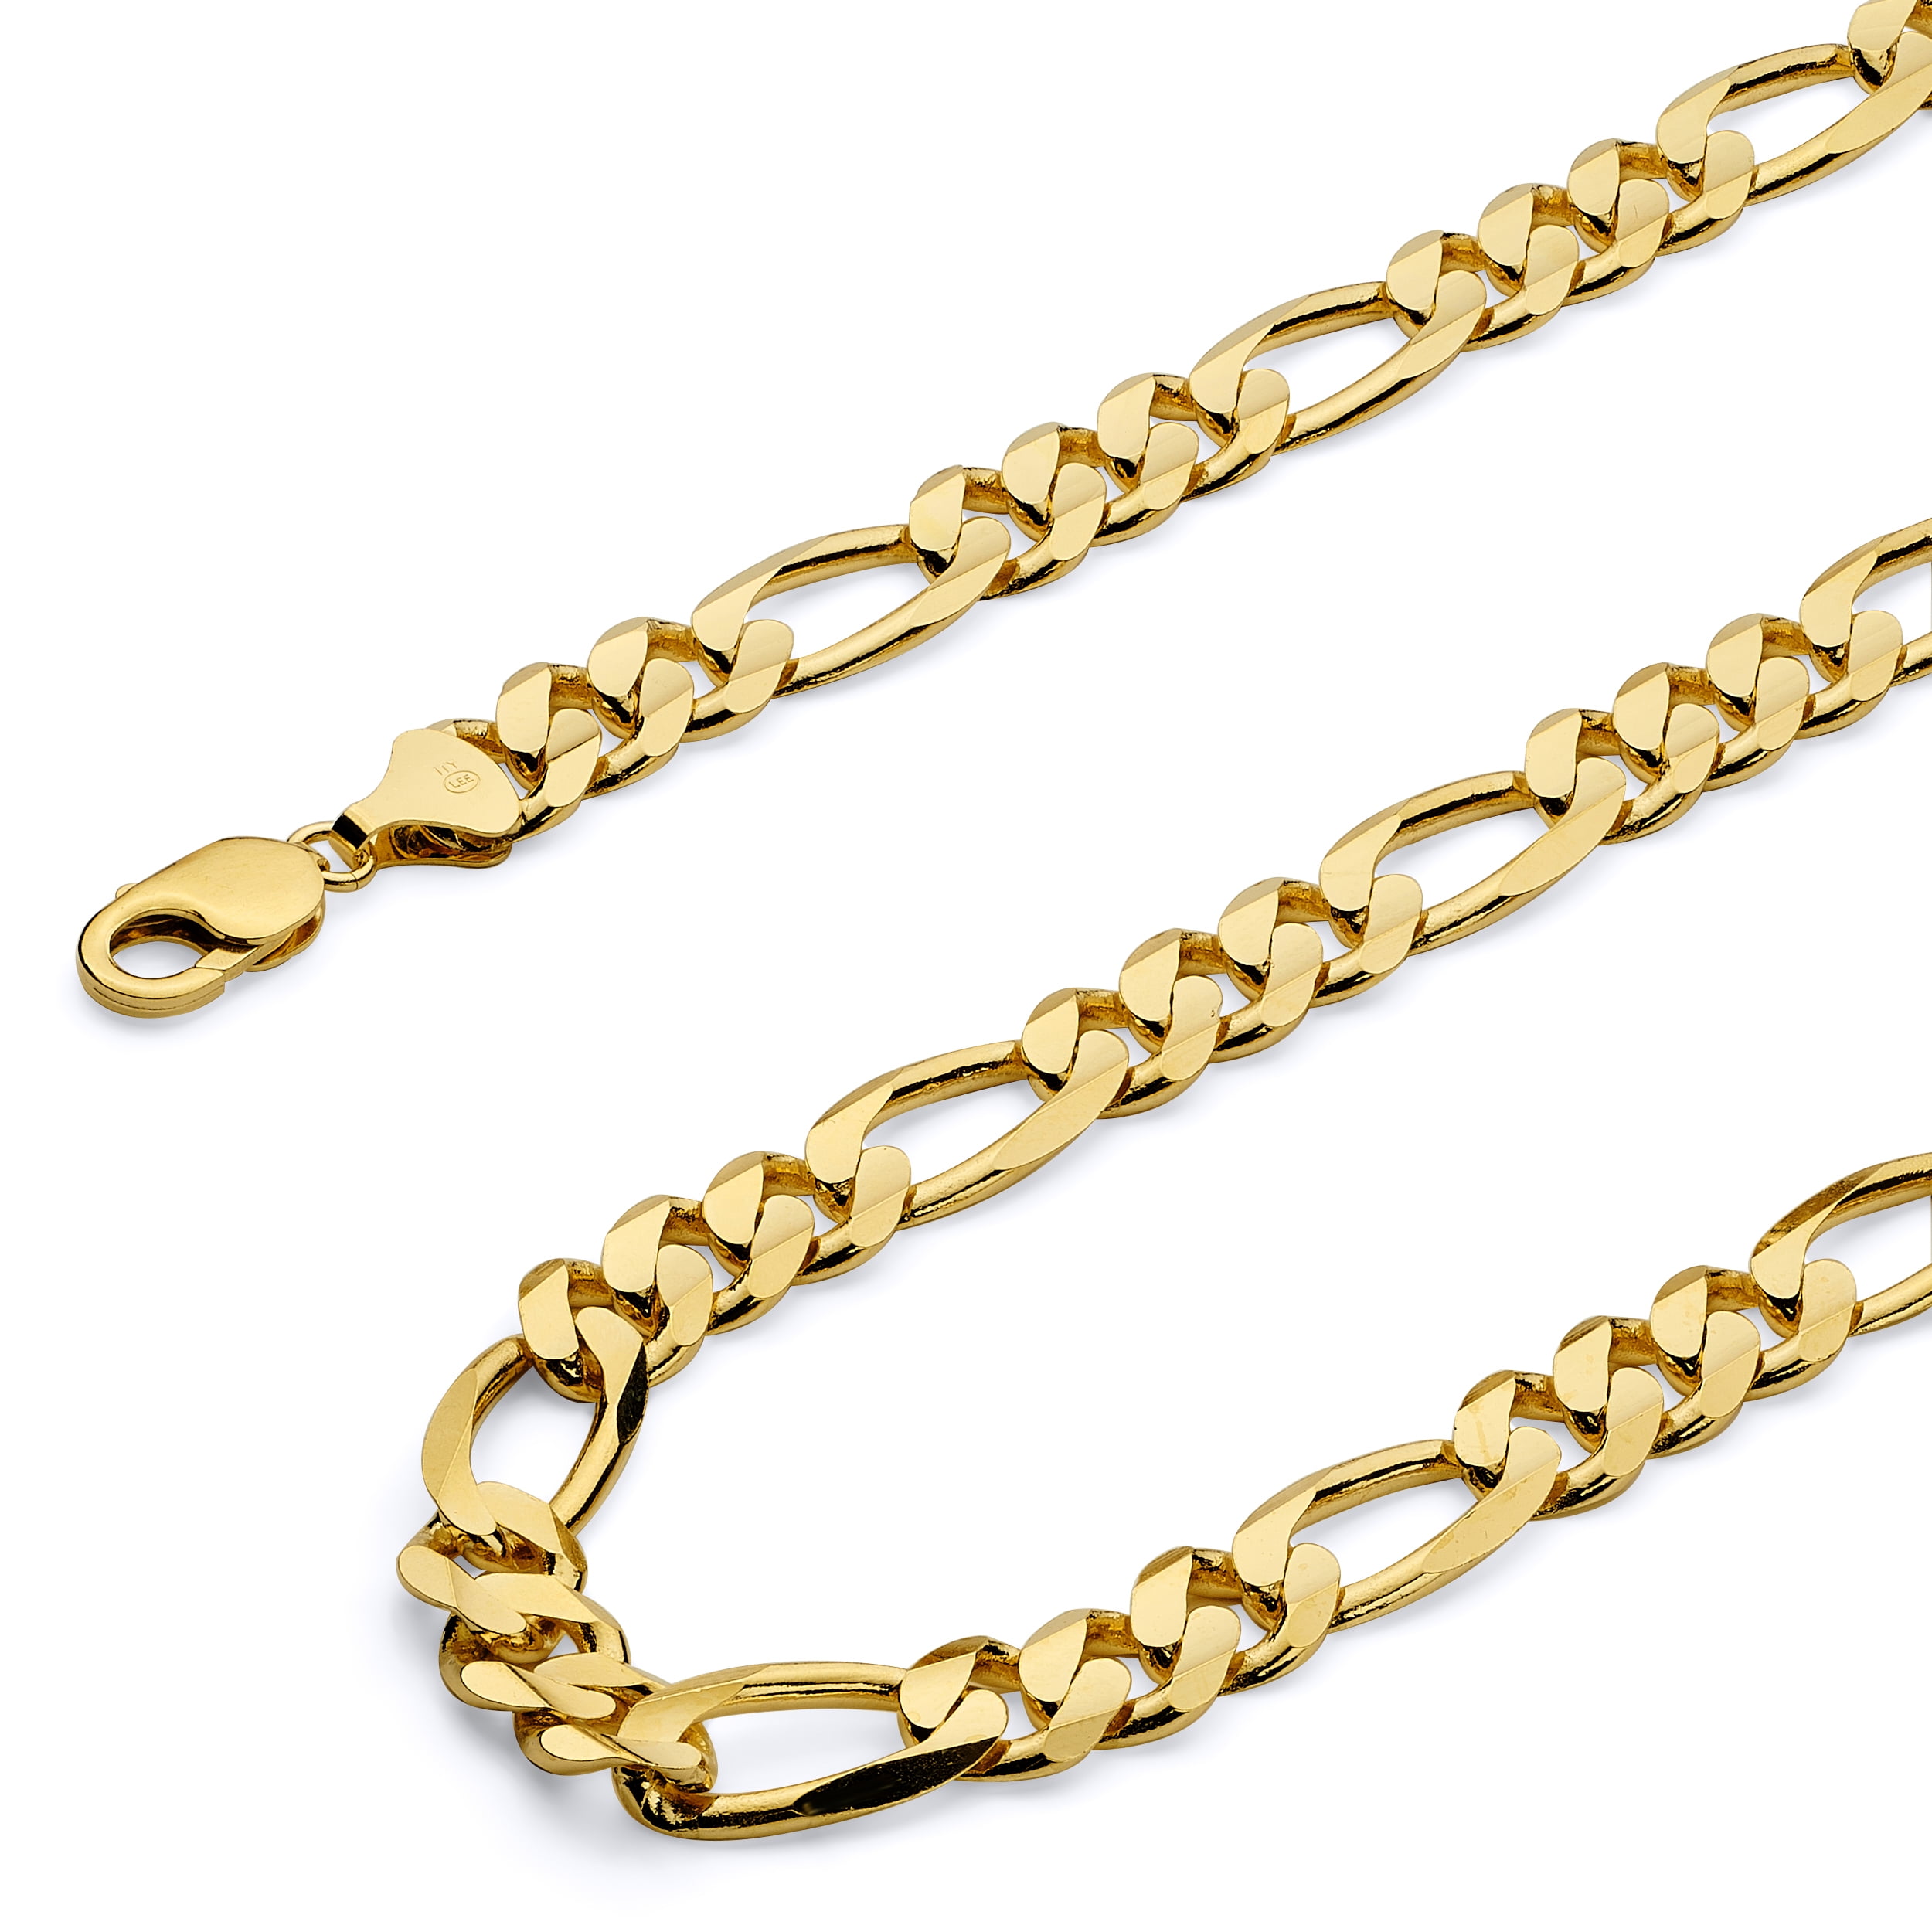 Wellingsale 14k Yellow Gold Polished Solid 4mm Figaro 3+1 Concave Chain Necklace